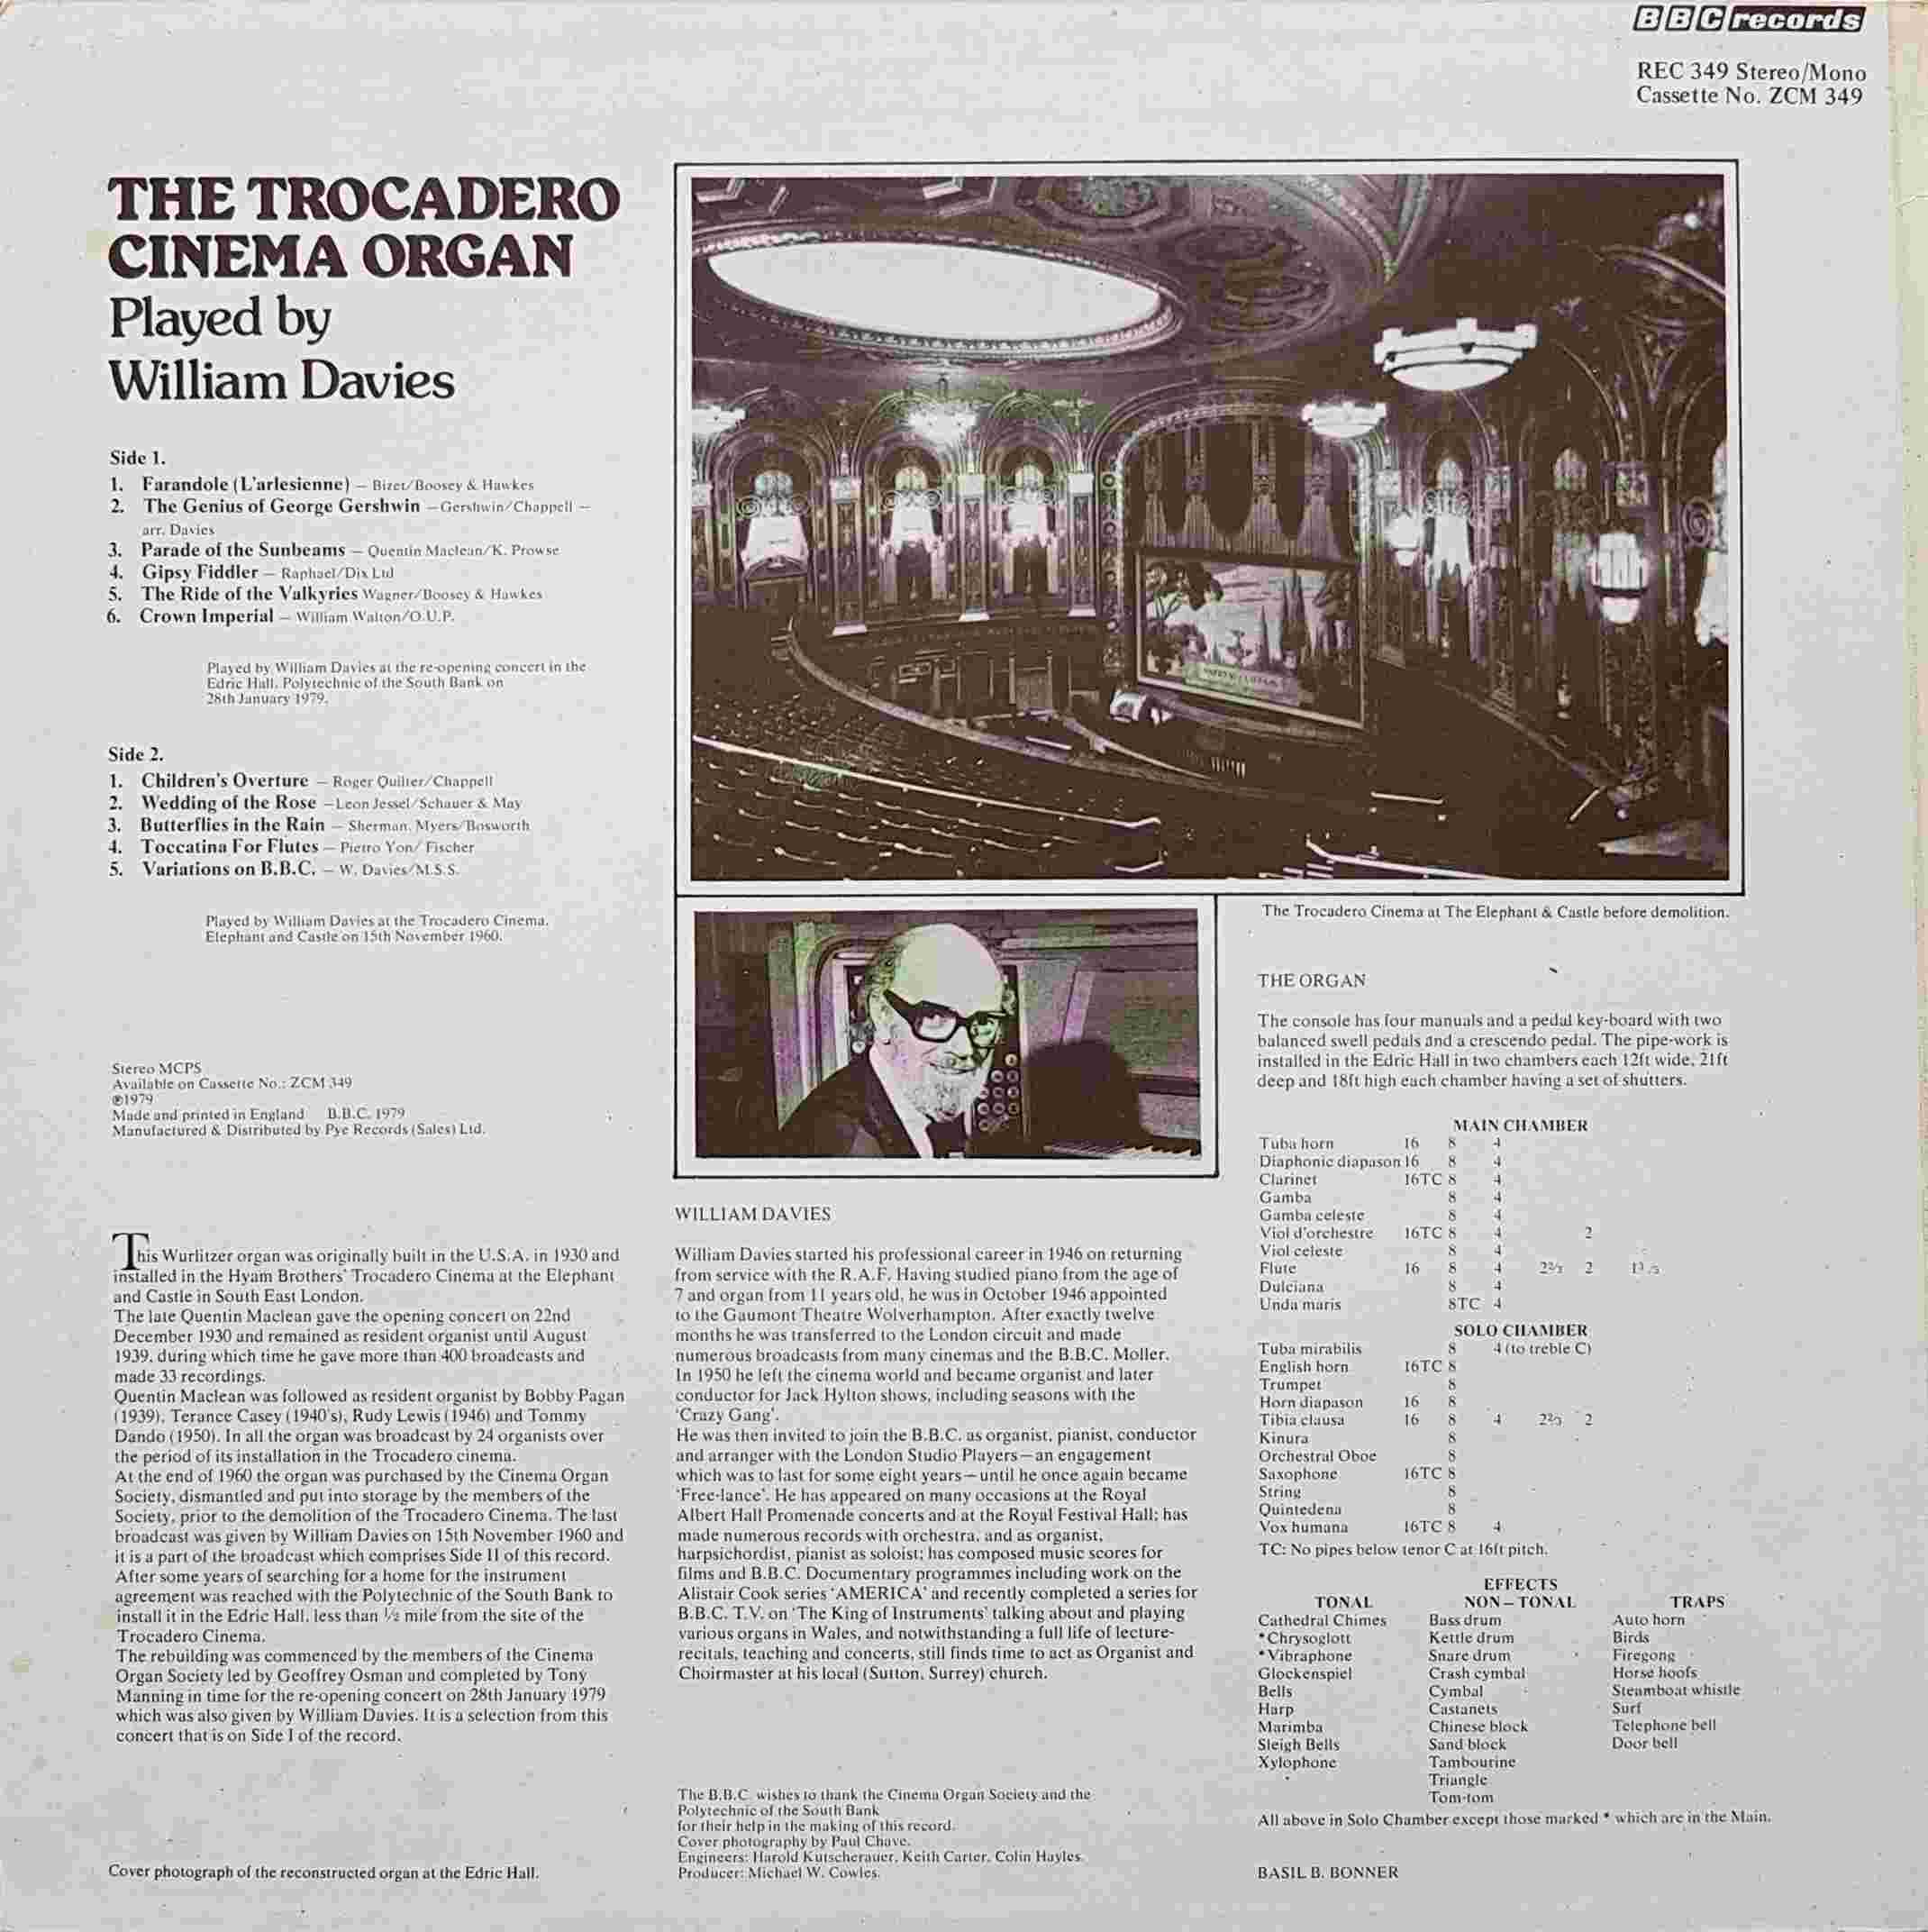 Picture of REC 349 Trocadero cinema by artist William Davies from the BBC records and Tapes library